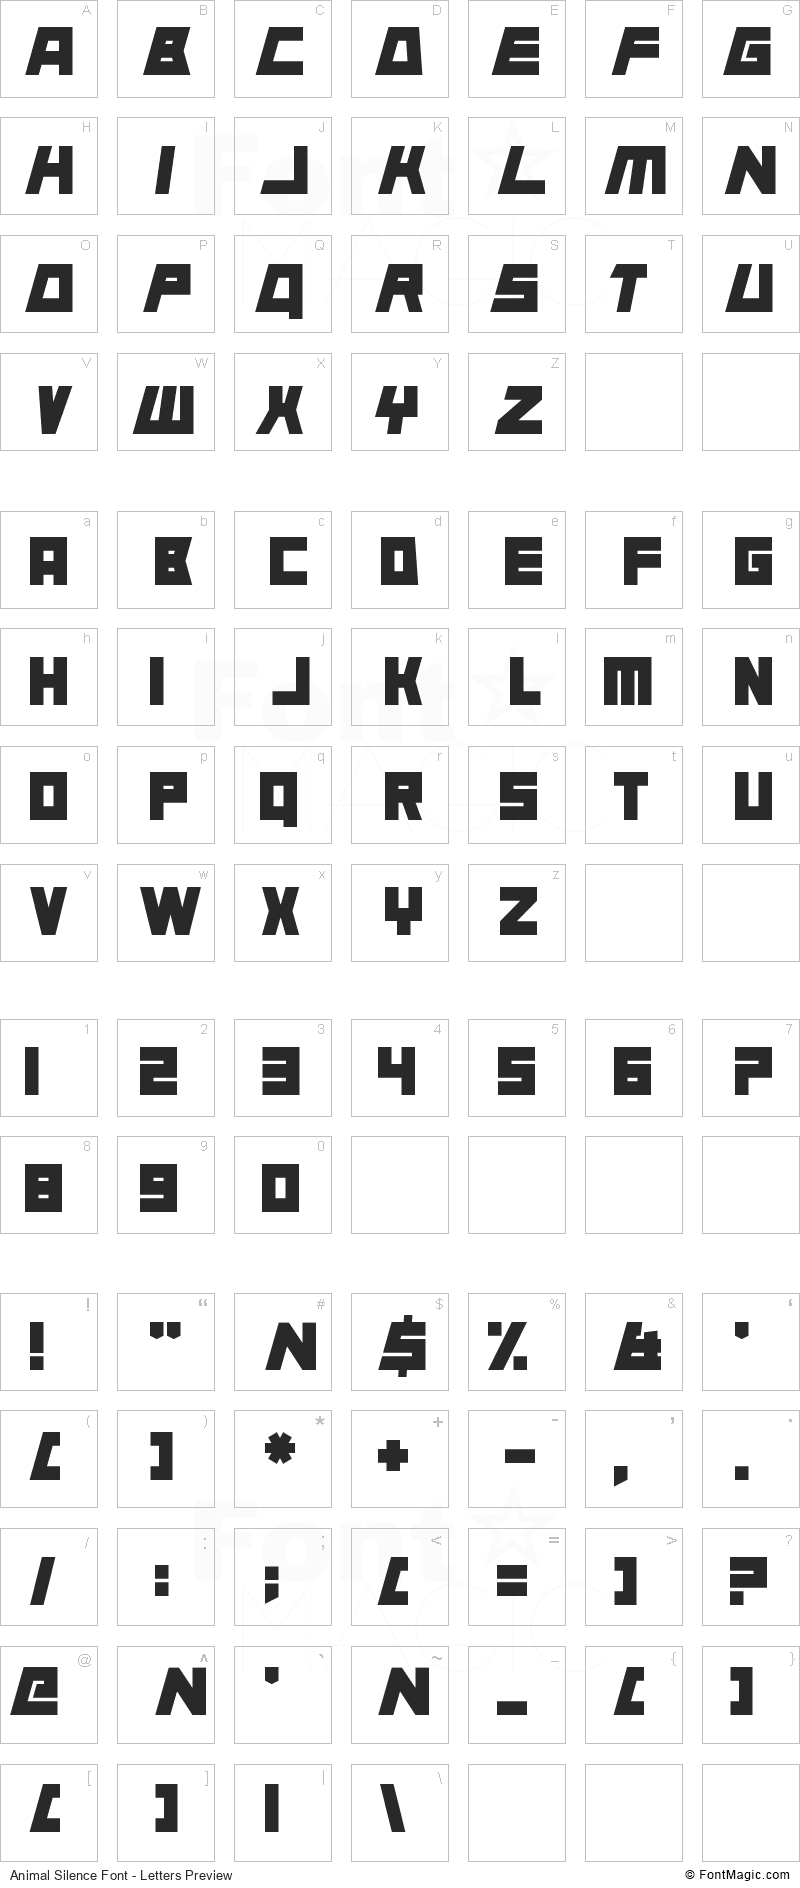 Animal Silence Font - All Latters Preview Chart